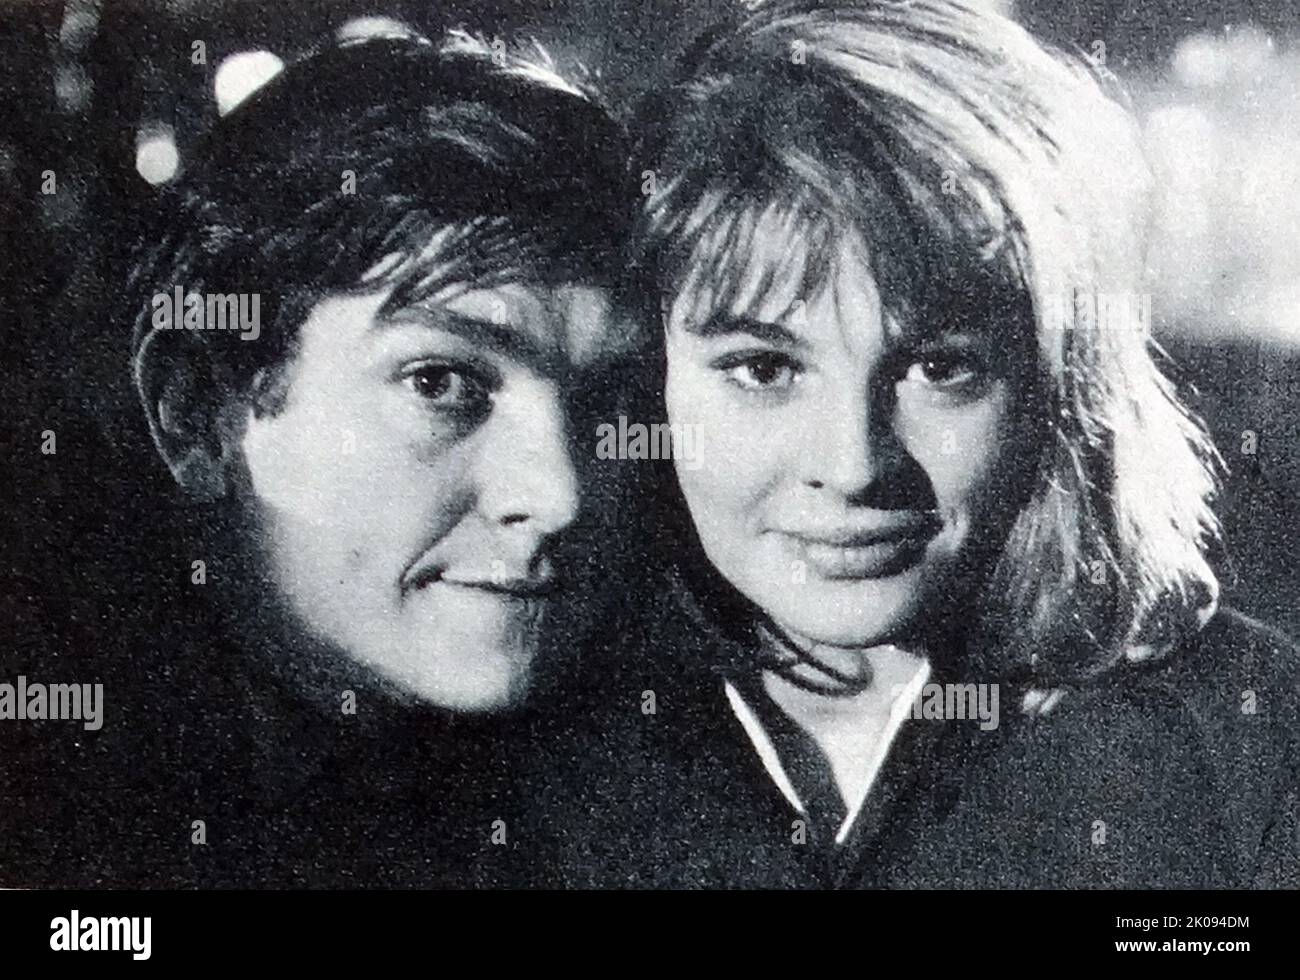 Newspaper review of the 1963 film Billy Liar, photograph of Julie Christie and Tom Courtenay. Stock Photo